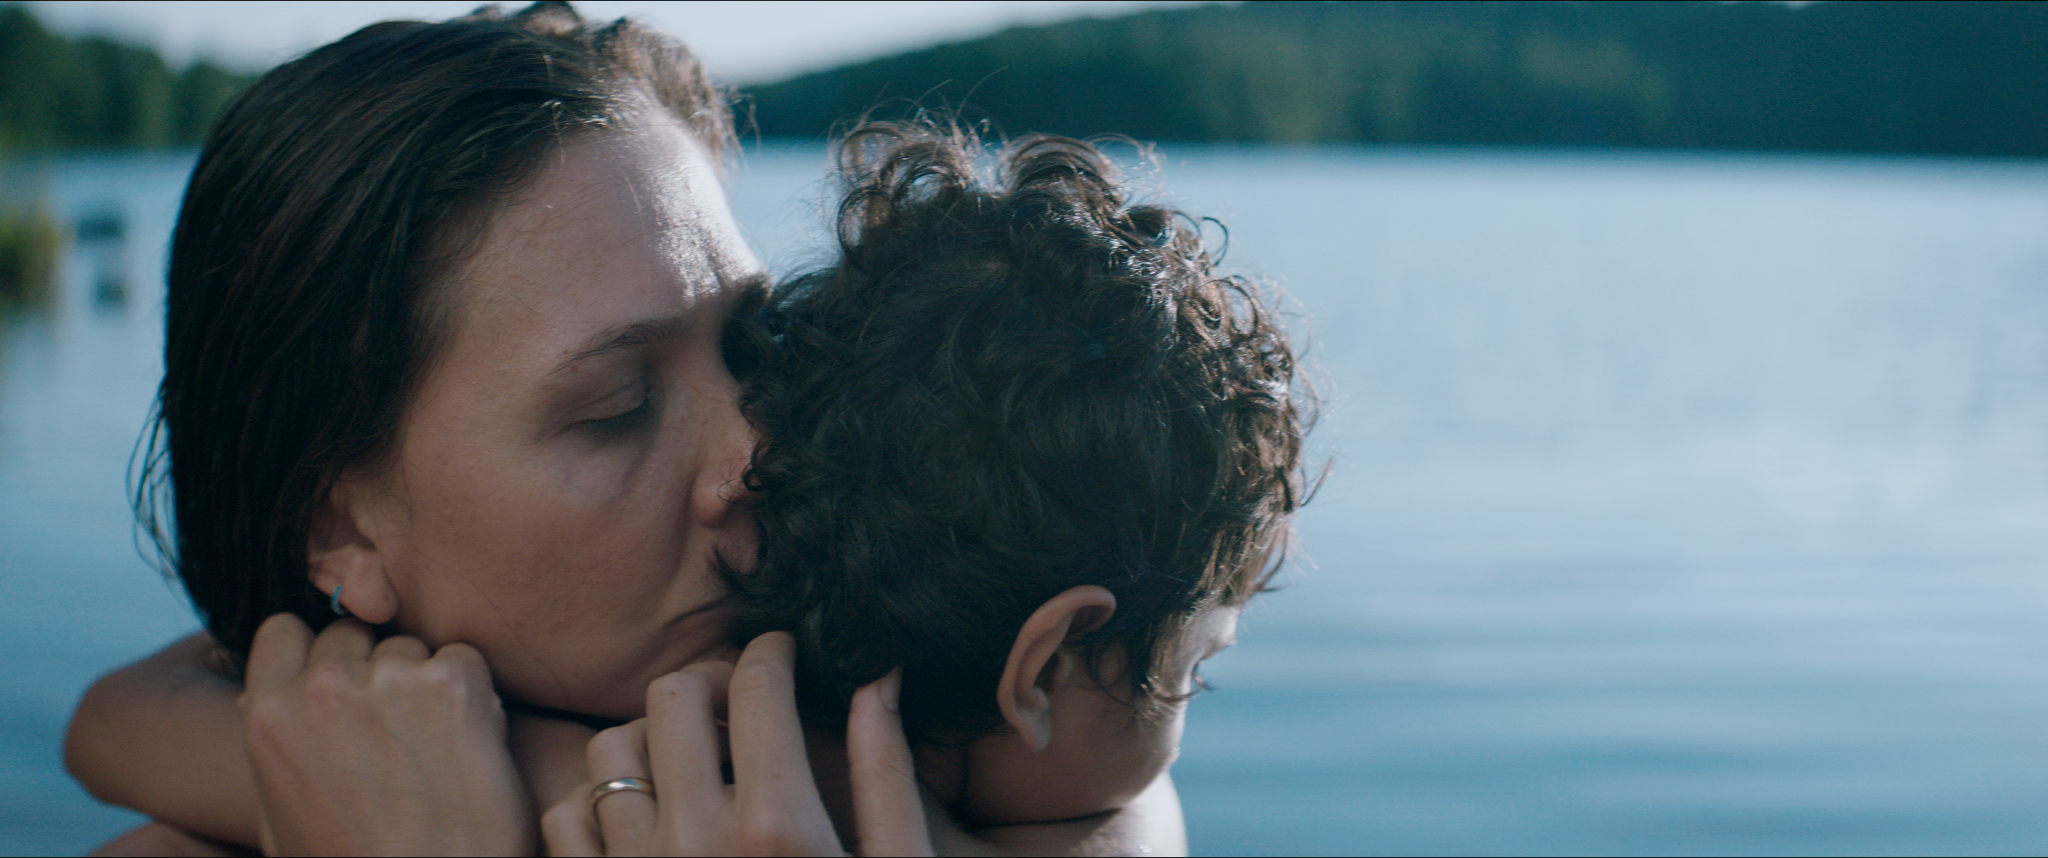 Maggie Gyllenhaal holds Parker Sevak in a tight embrace, her face turned towards his hair. There is a lake in the background.